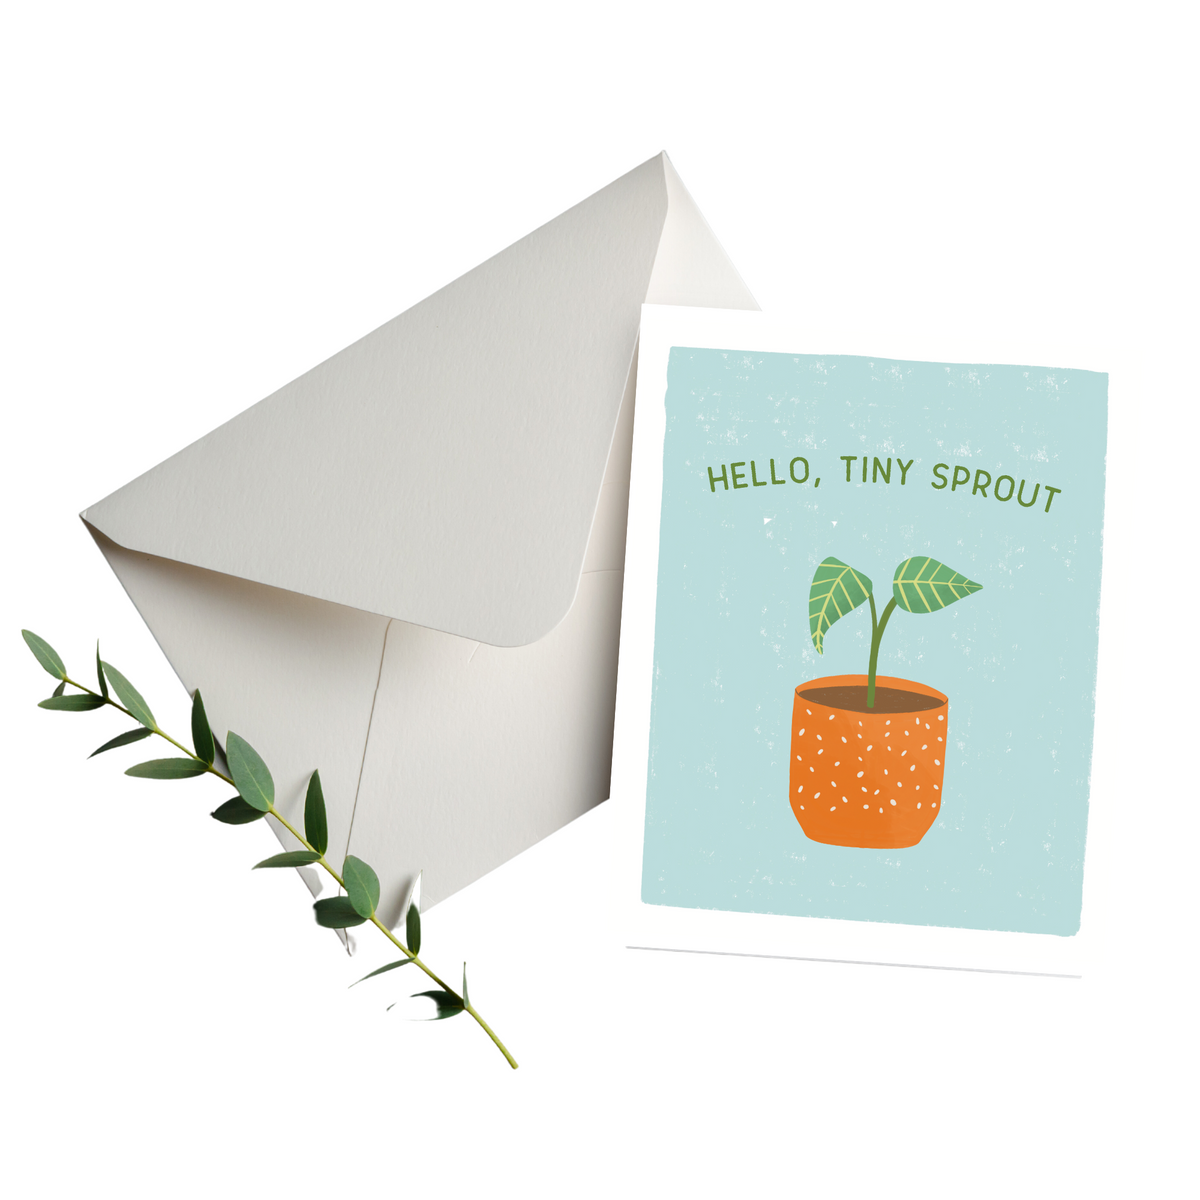 Hello, Tiny Sprout Card